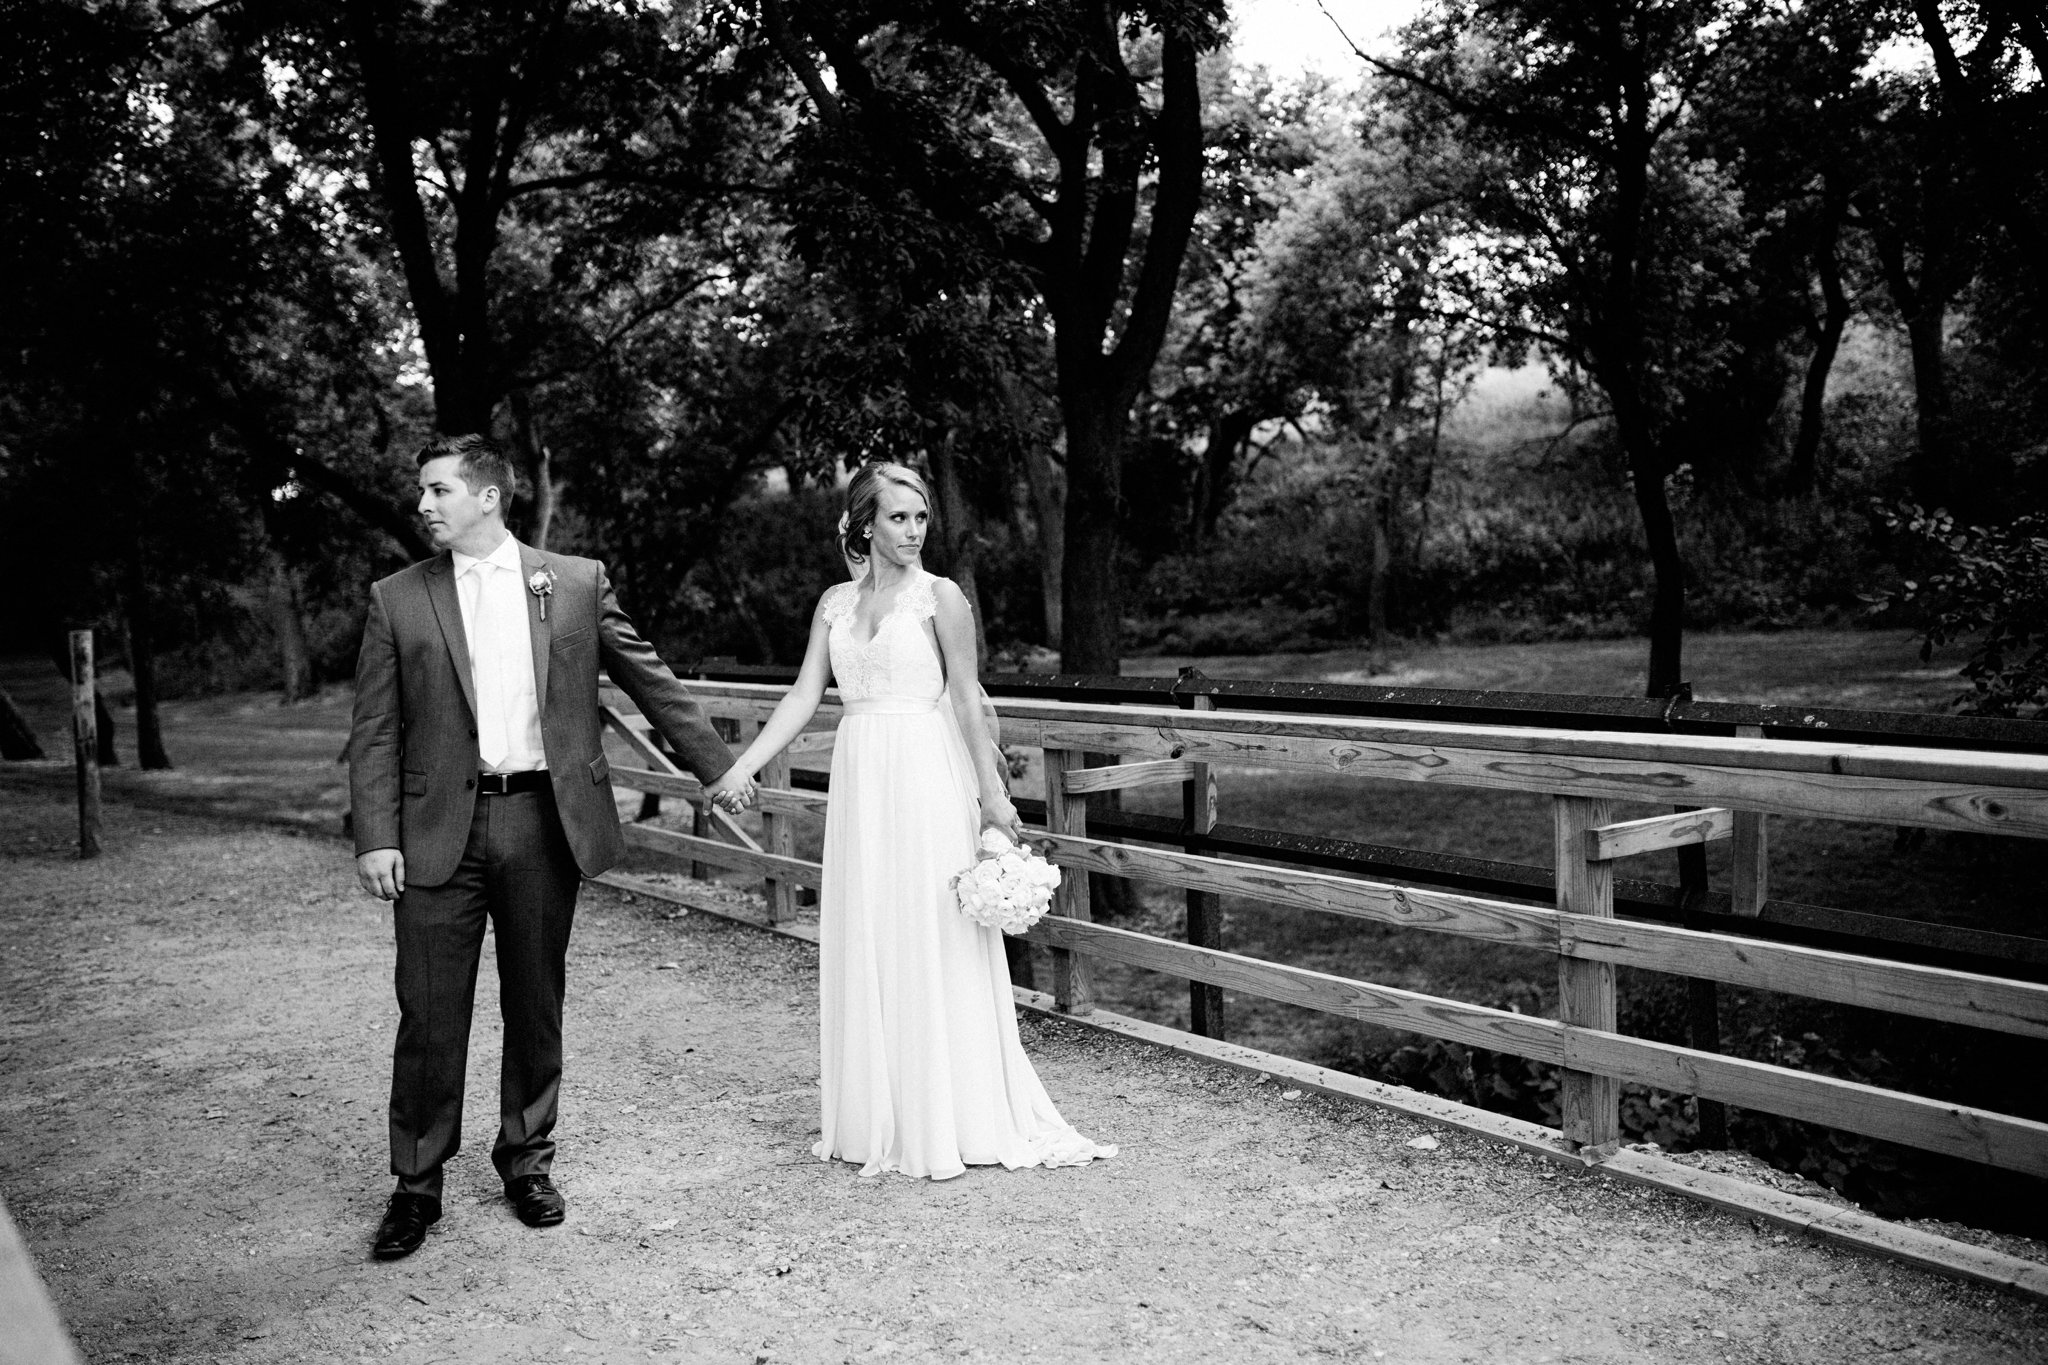 Sioux Falls Wedding Photos | Destination Photographer | Felicia The Photographer | Mary Jo Wegner Arboretum | bride and groom pose | boho bridal style | indie posing | outdoor natural photos | Romantic | Truvelle | Jordan | Backless Gown | Black and White